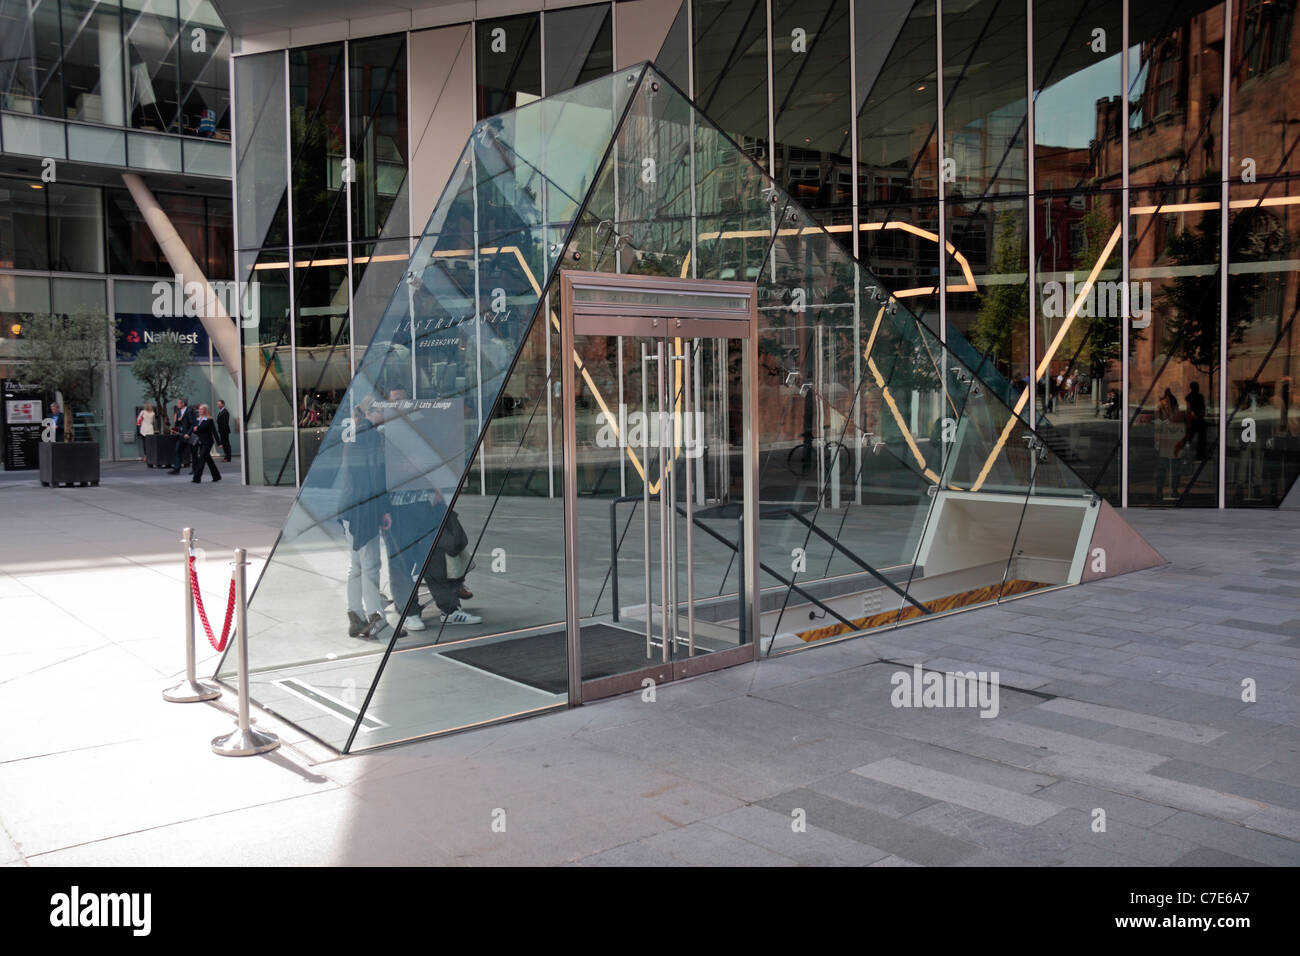 The amazing glass entrance at street level to the Australasia Restaurant, , Spinningfields Square, Manchester, UK. Stock Photo